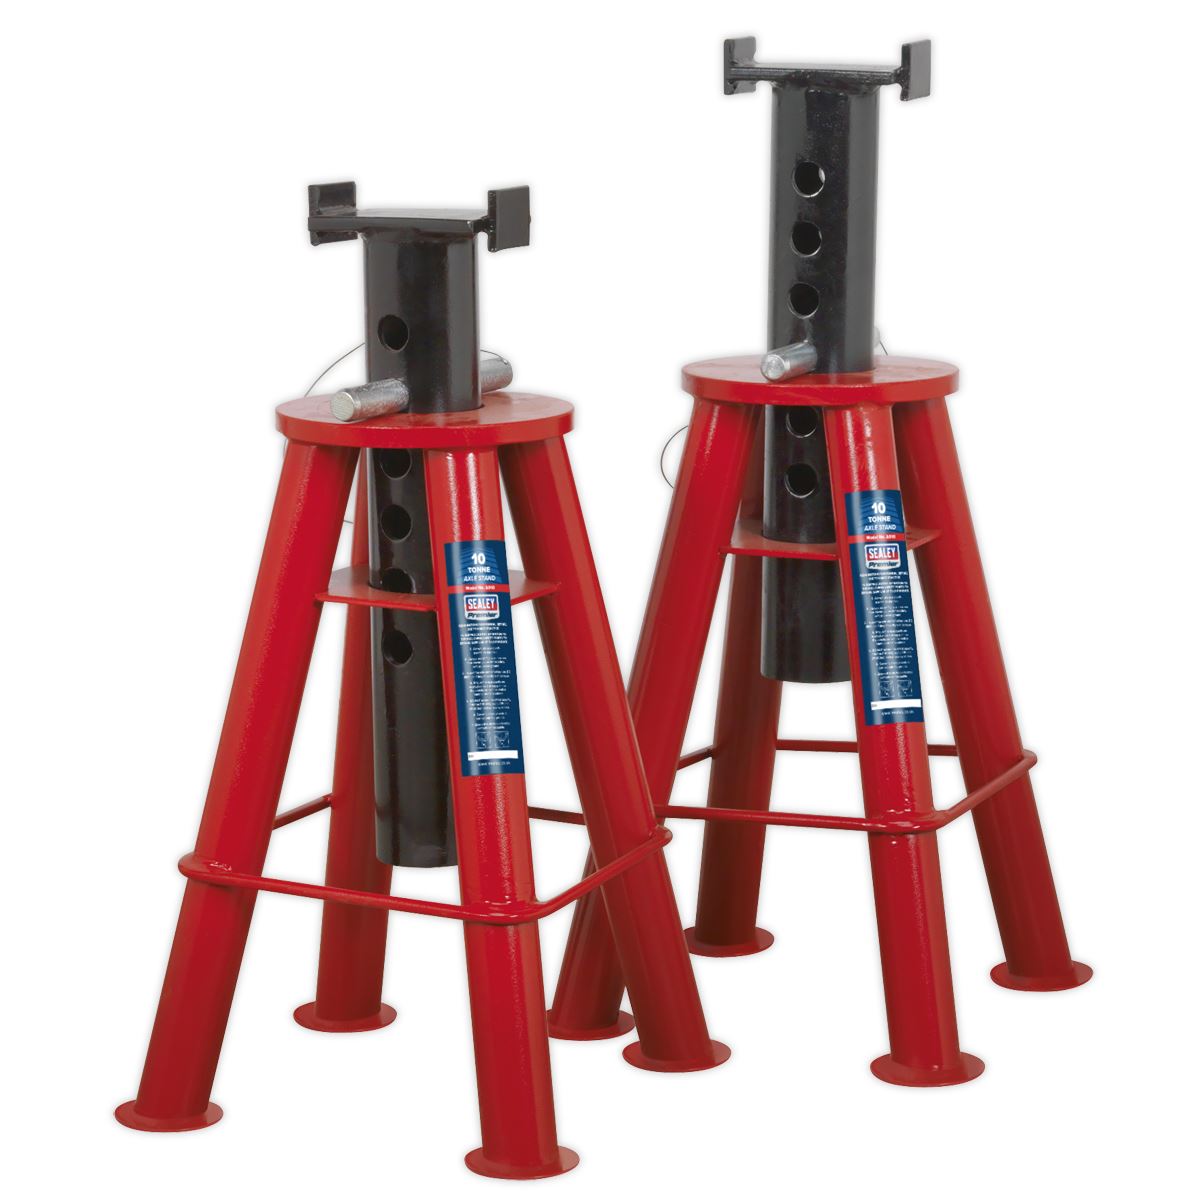 Sealey Premier Axle Stands (Pair) 10 Tonne Capacity per Stand